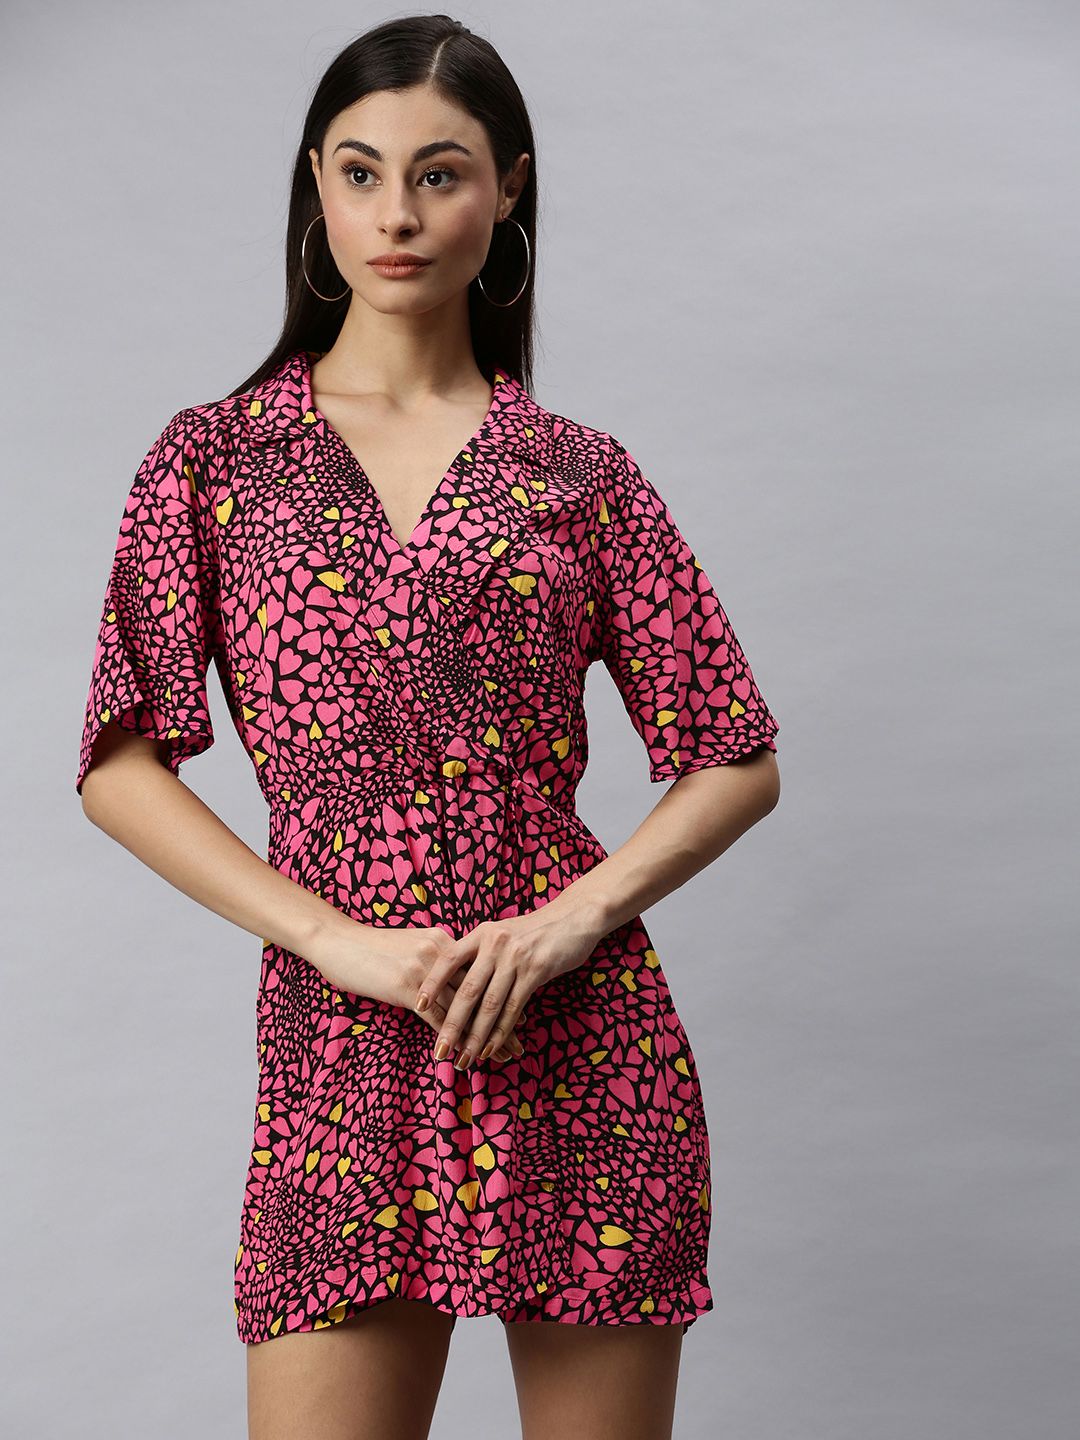 ONLY Women Pink & Black Printed Playsuit Price in India